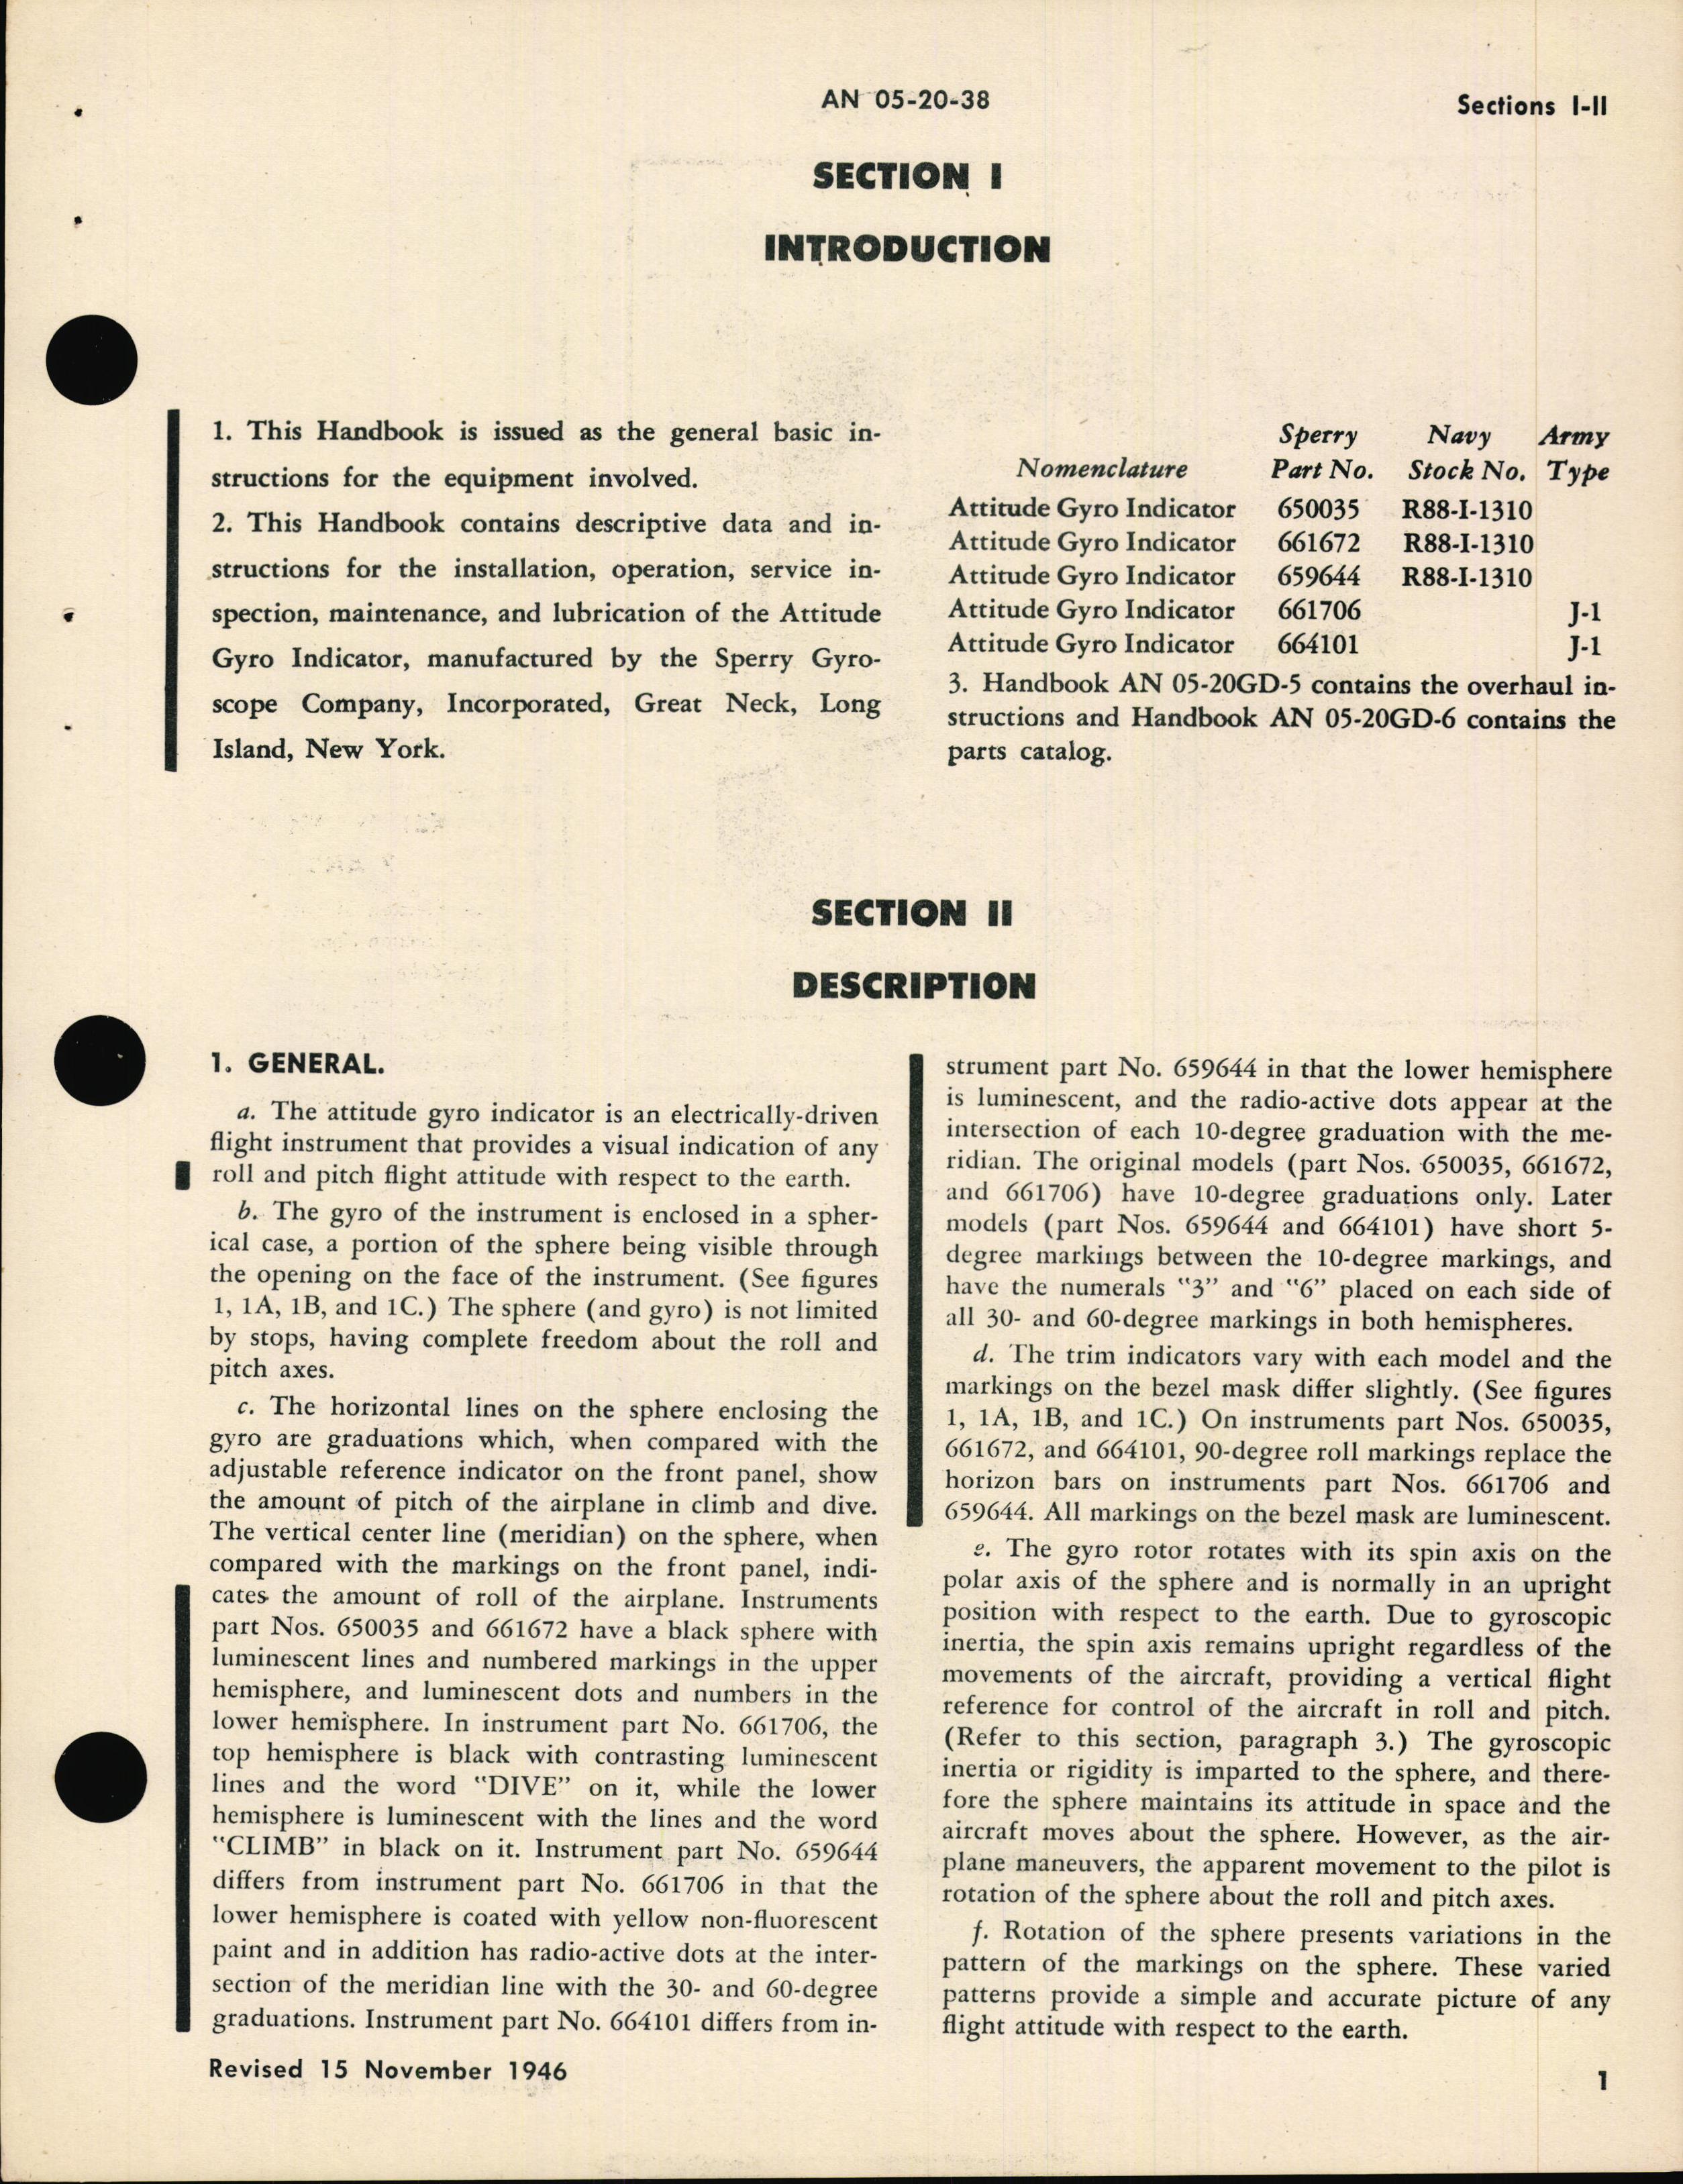 Sample page 5 from AirCorps Library document: Operation and Service Instructions for Attitude Gyro Indicator Type J-1